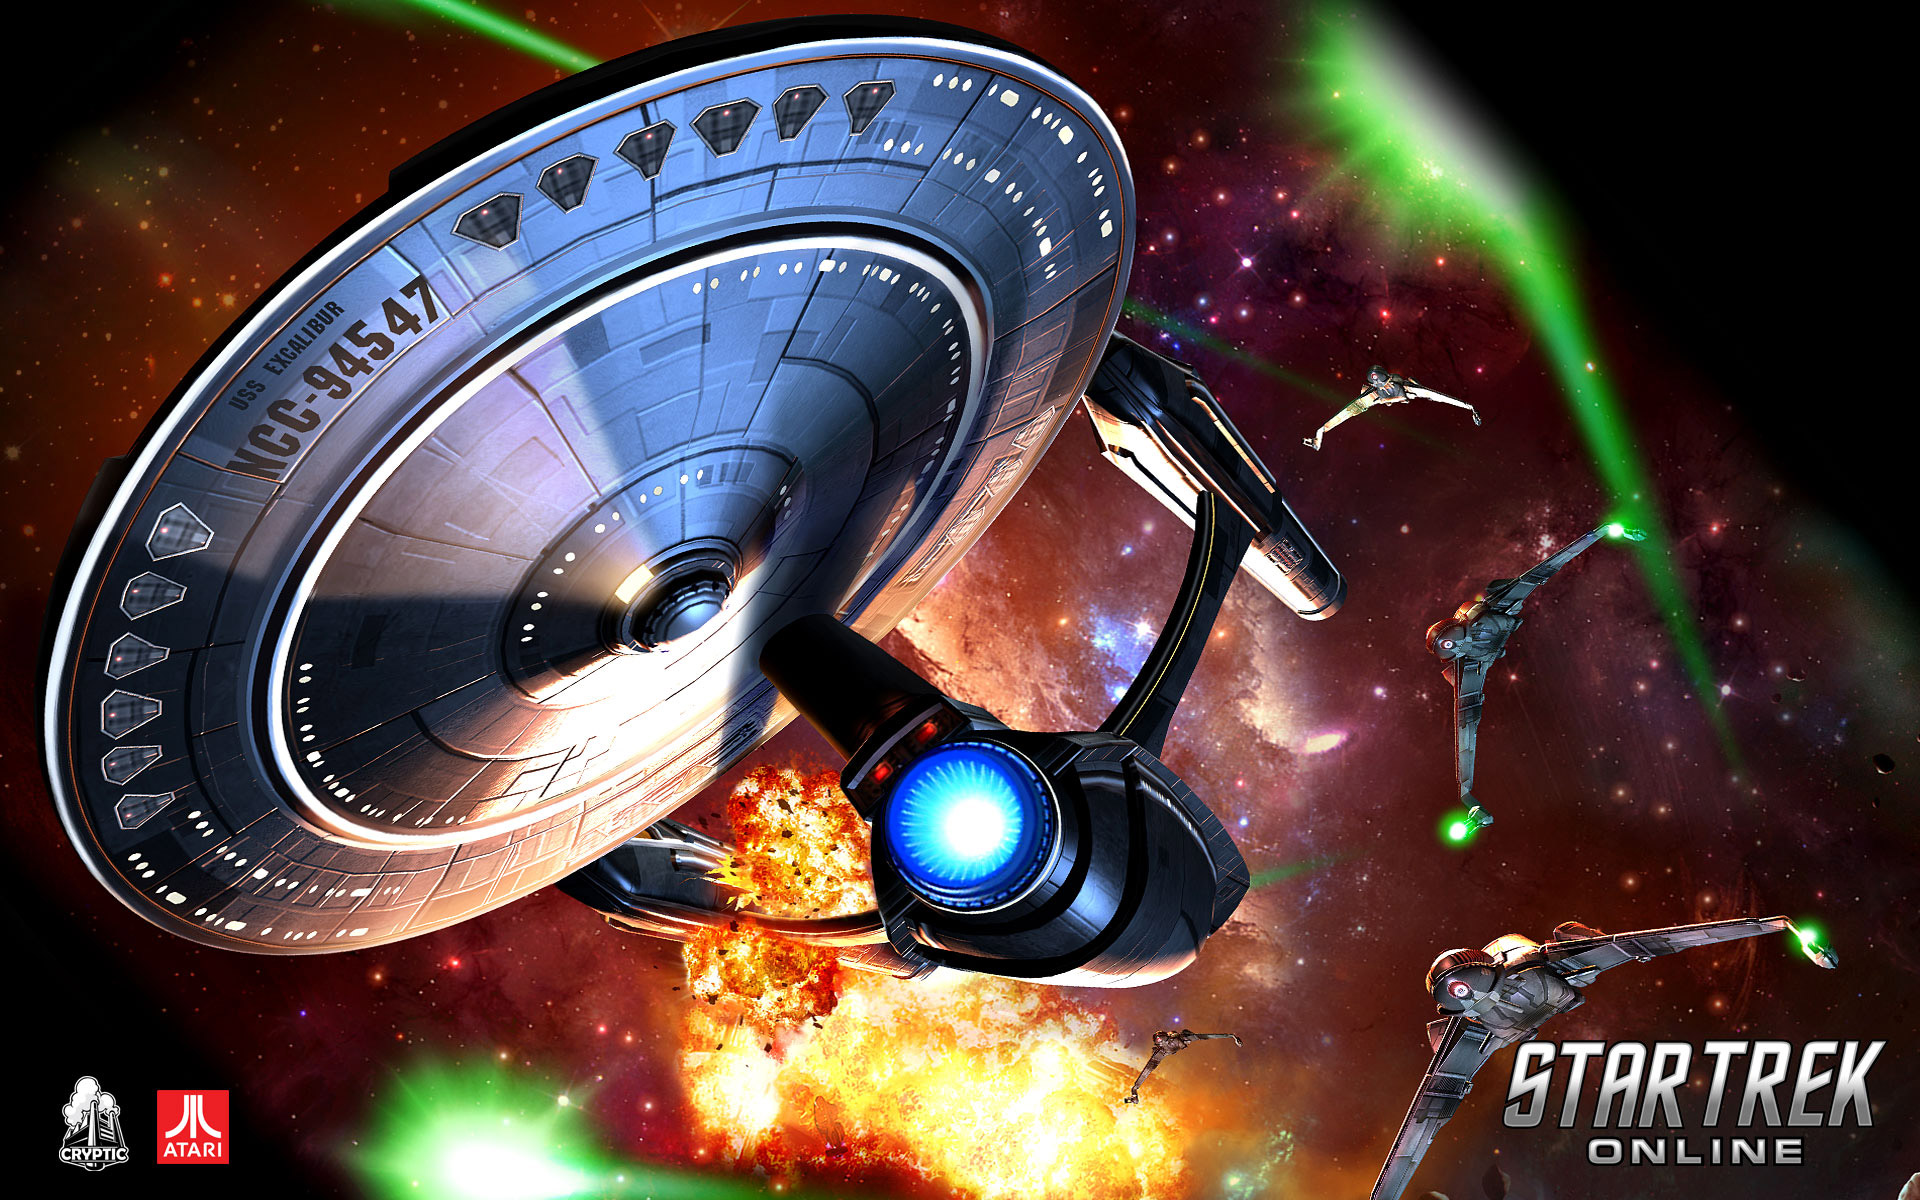 HD Star Trek Online Wallpaper For iPhone Android Mobile